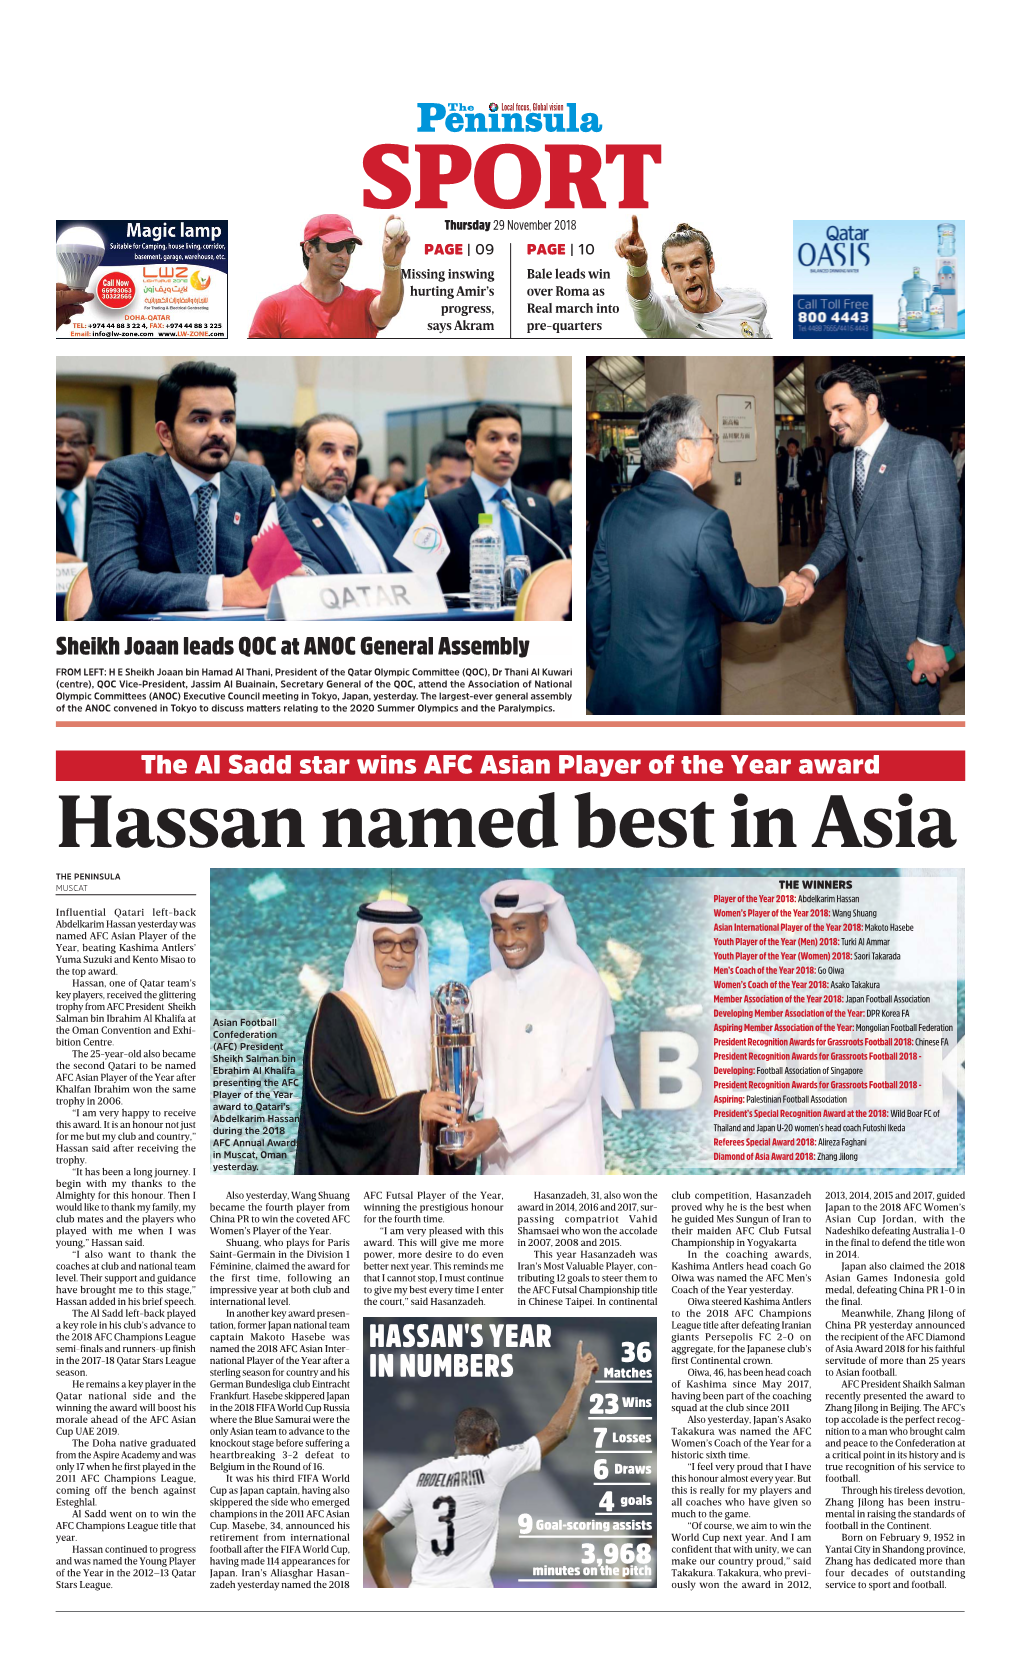 Hassan Named Best in Asia